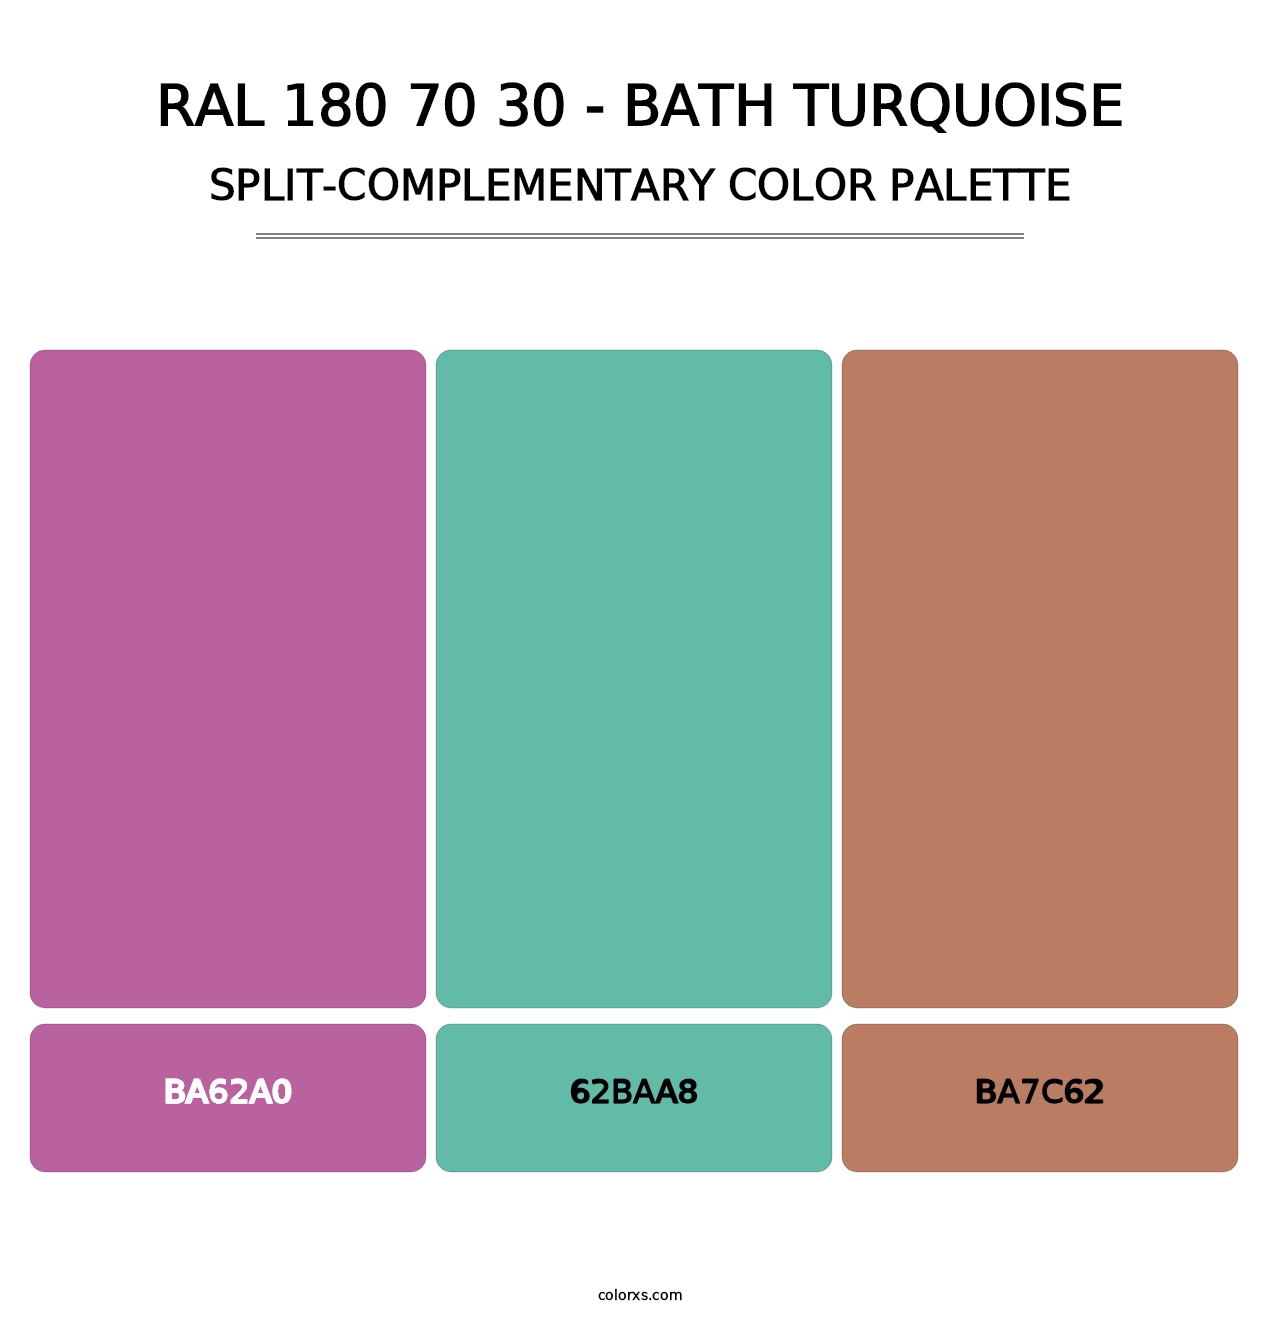 RAL 180 70 30 - Bath Turquoise - Split-Complementary Color Palette